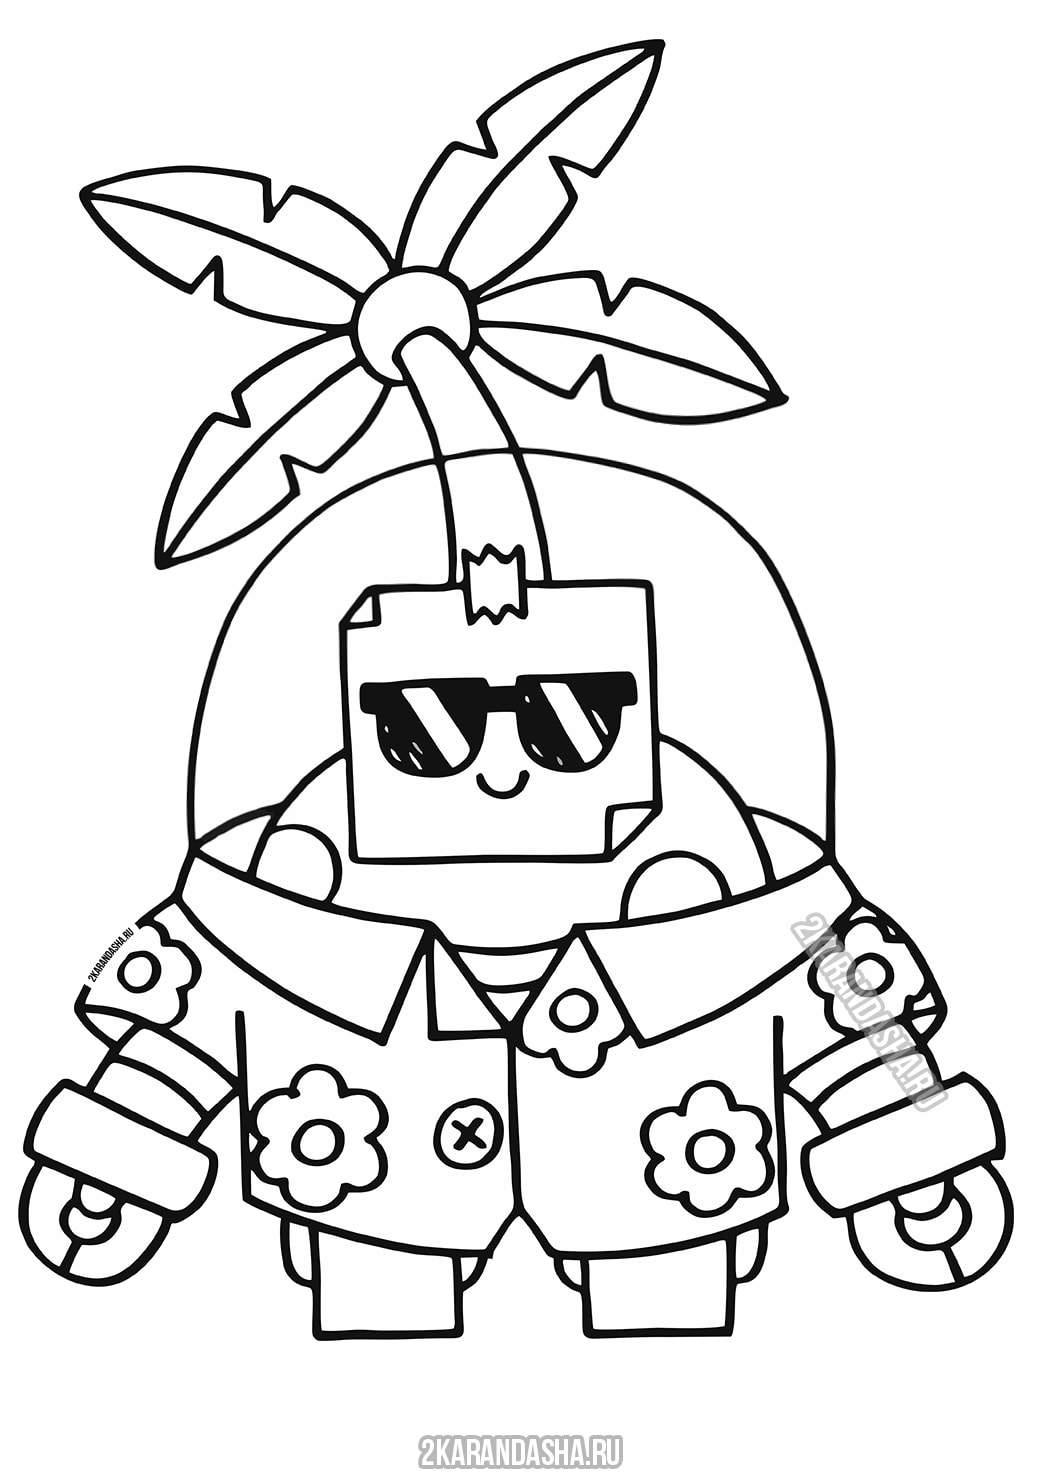 Coloring Page Brawl Stars Skin Tropical Sprout Print Brawl Stars - mega box brawl stars coloring pages